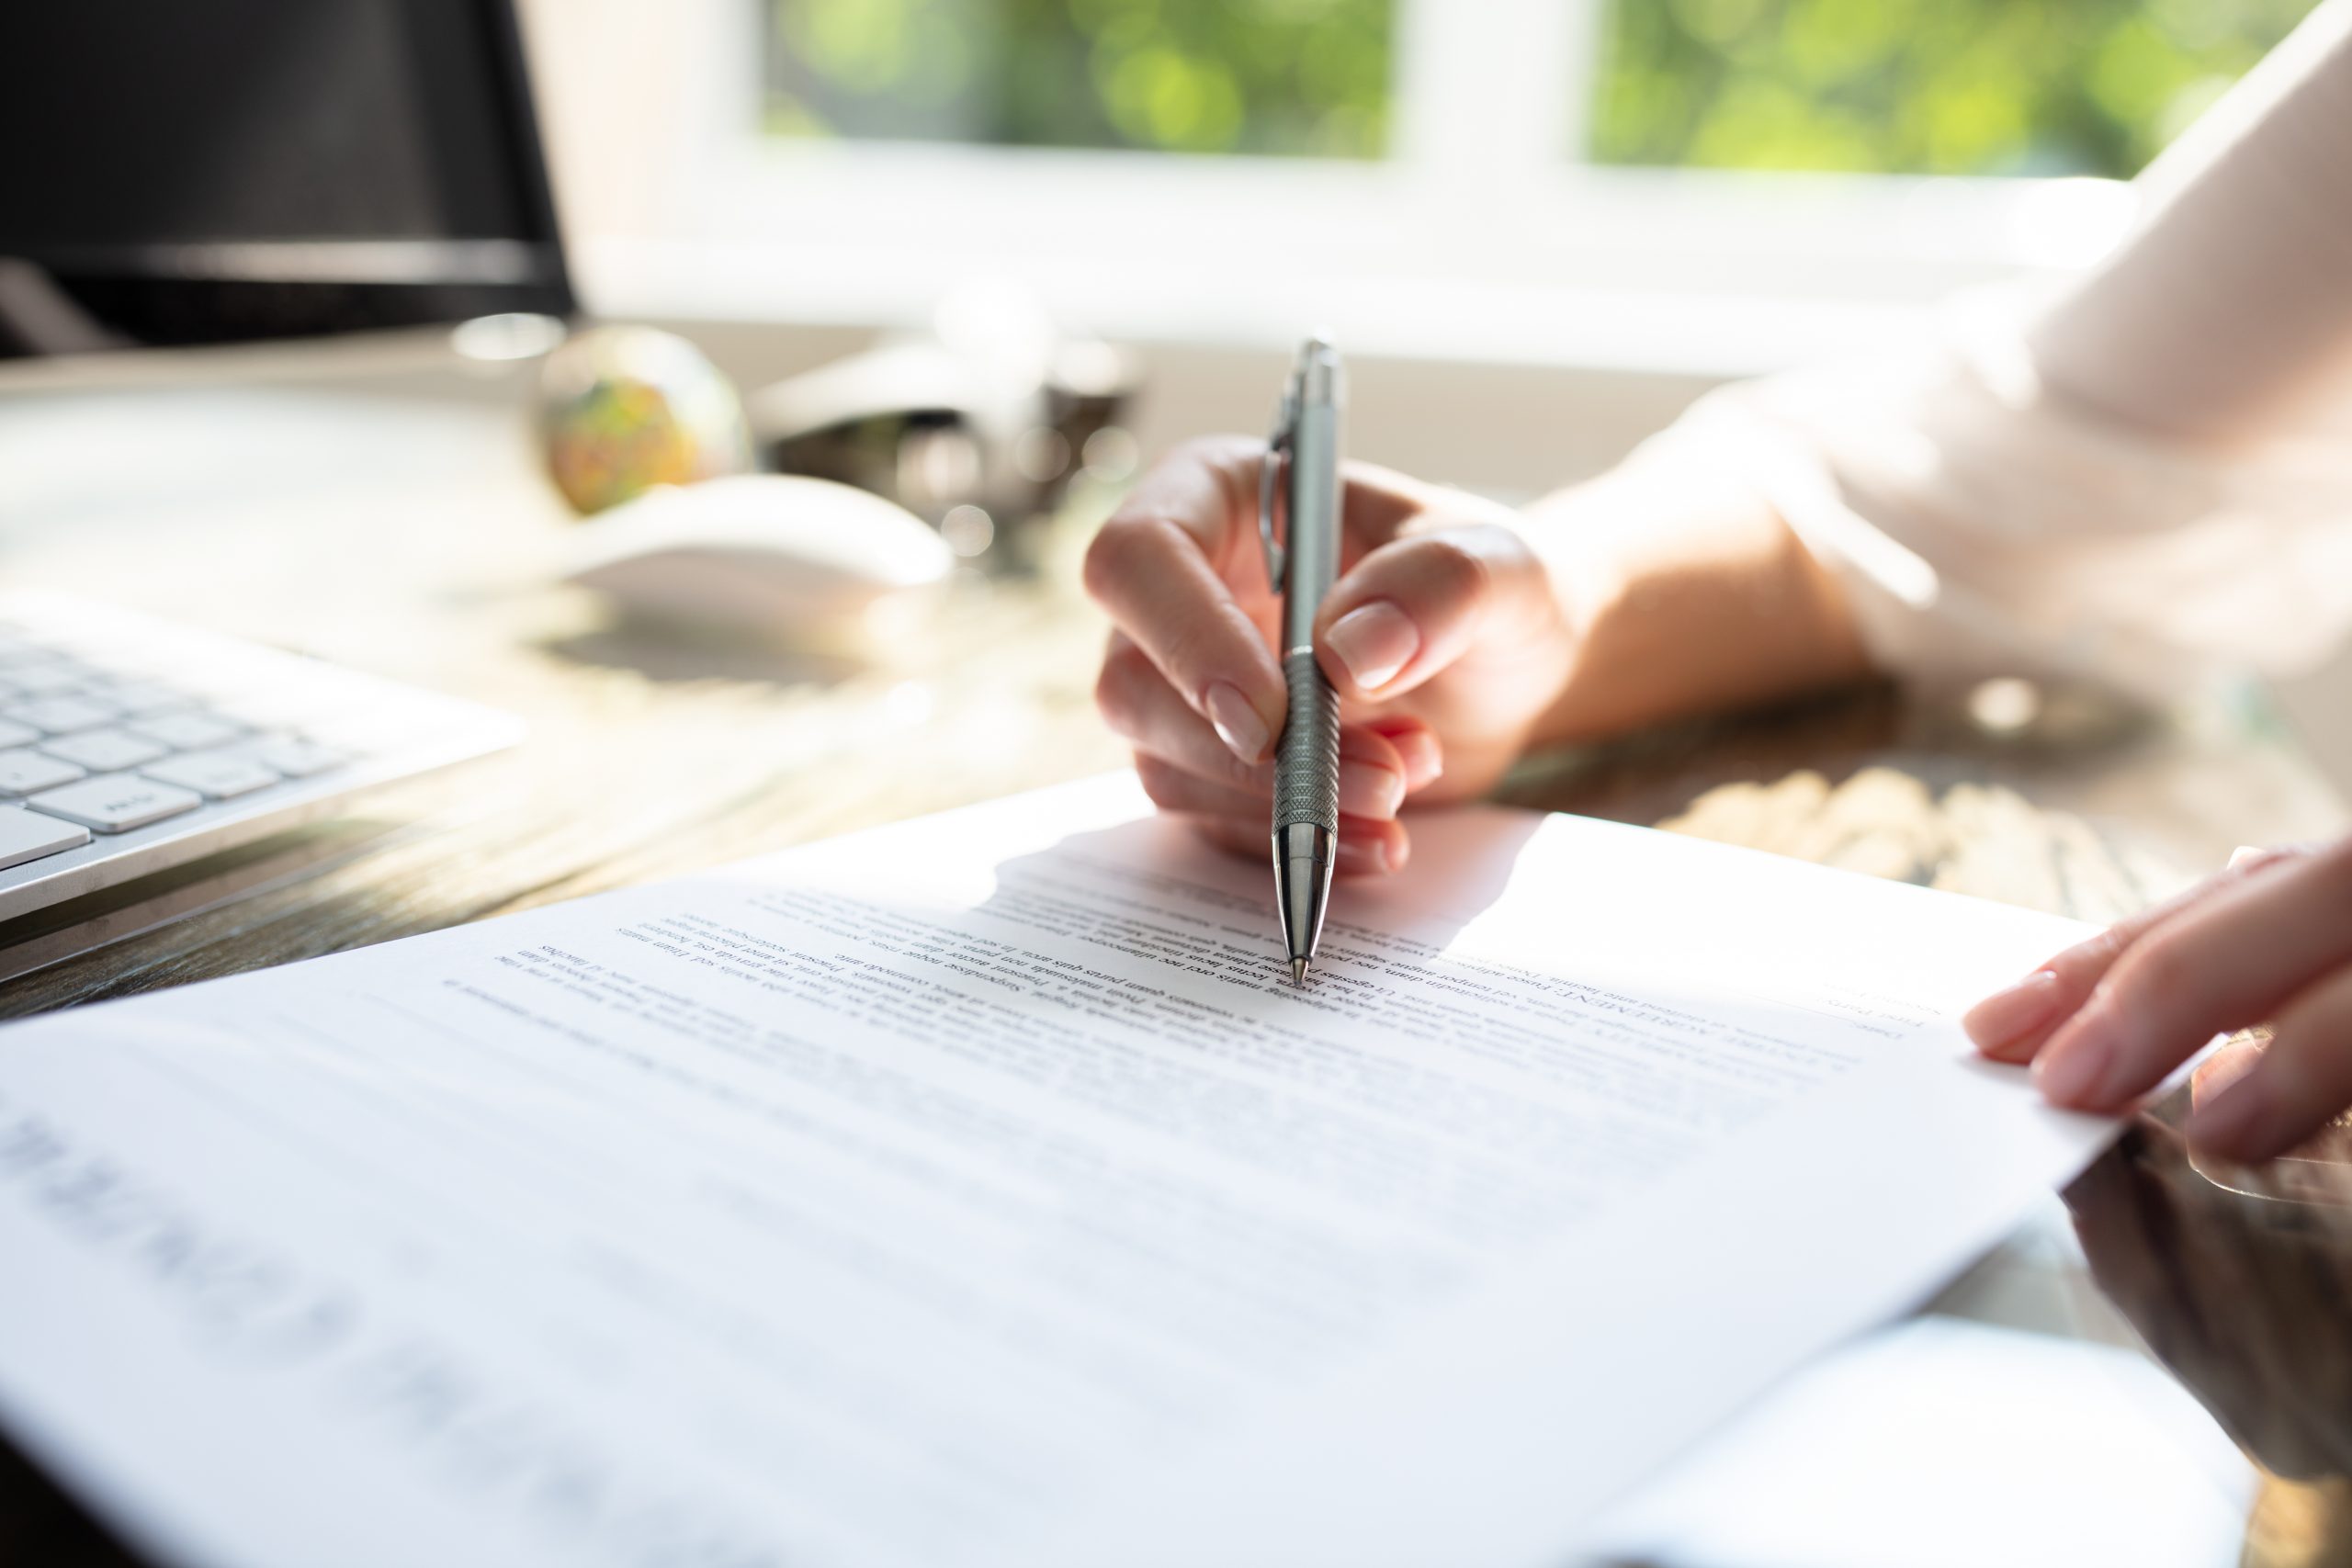 A woman signing a contract with a pen. If you have a breach of contract and require legal assistance, contact our Oakland employment law attorney.